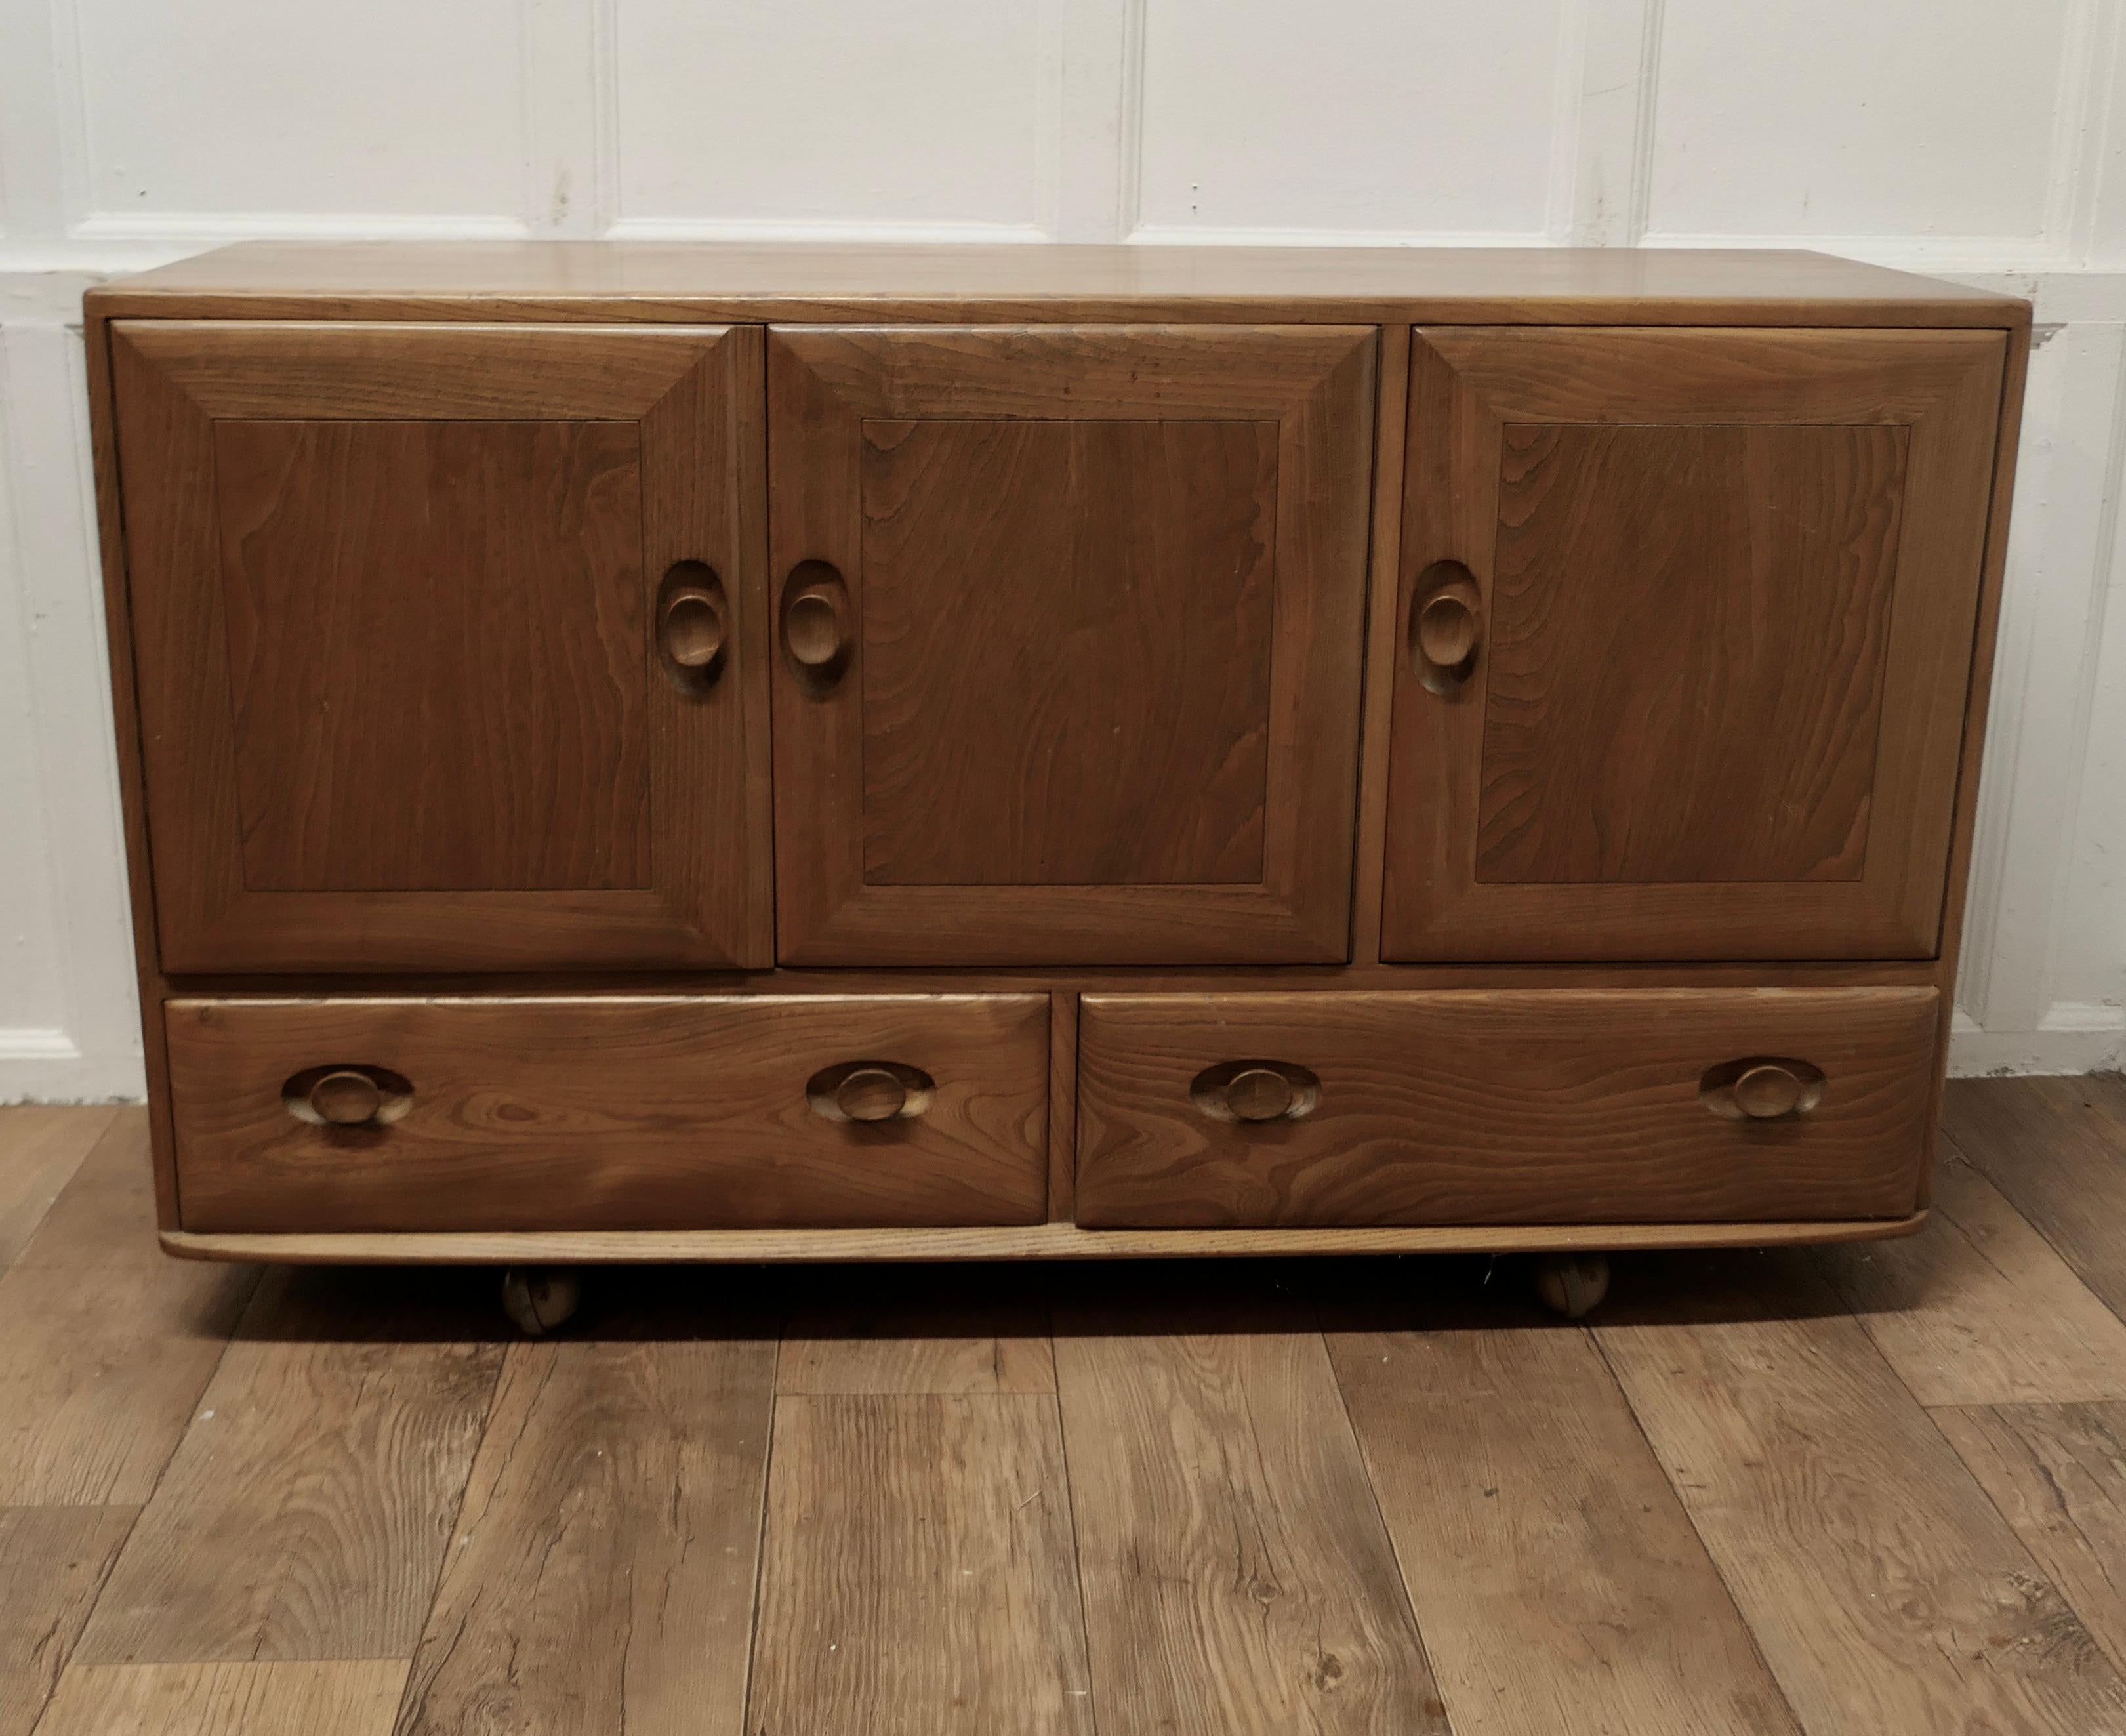 A Mid Century Golden Elm Sideboard by Ercol

The sideboard has 3 cupboard doors and 2 long drawers below, it has inset turned handles and it stands its original ball castors 

The sideboard has an elm top and it has a cutlery tray in the end